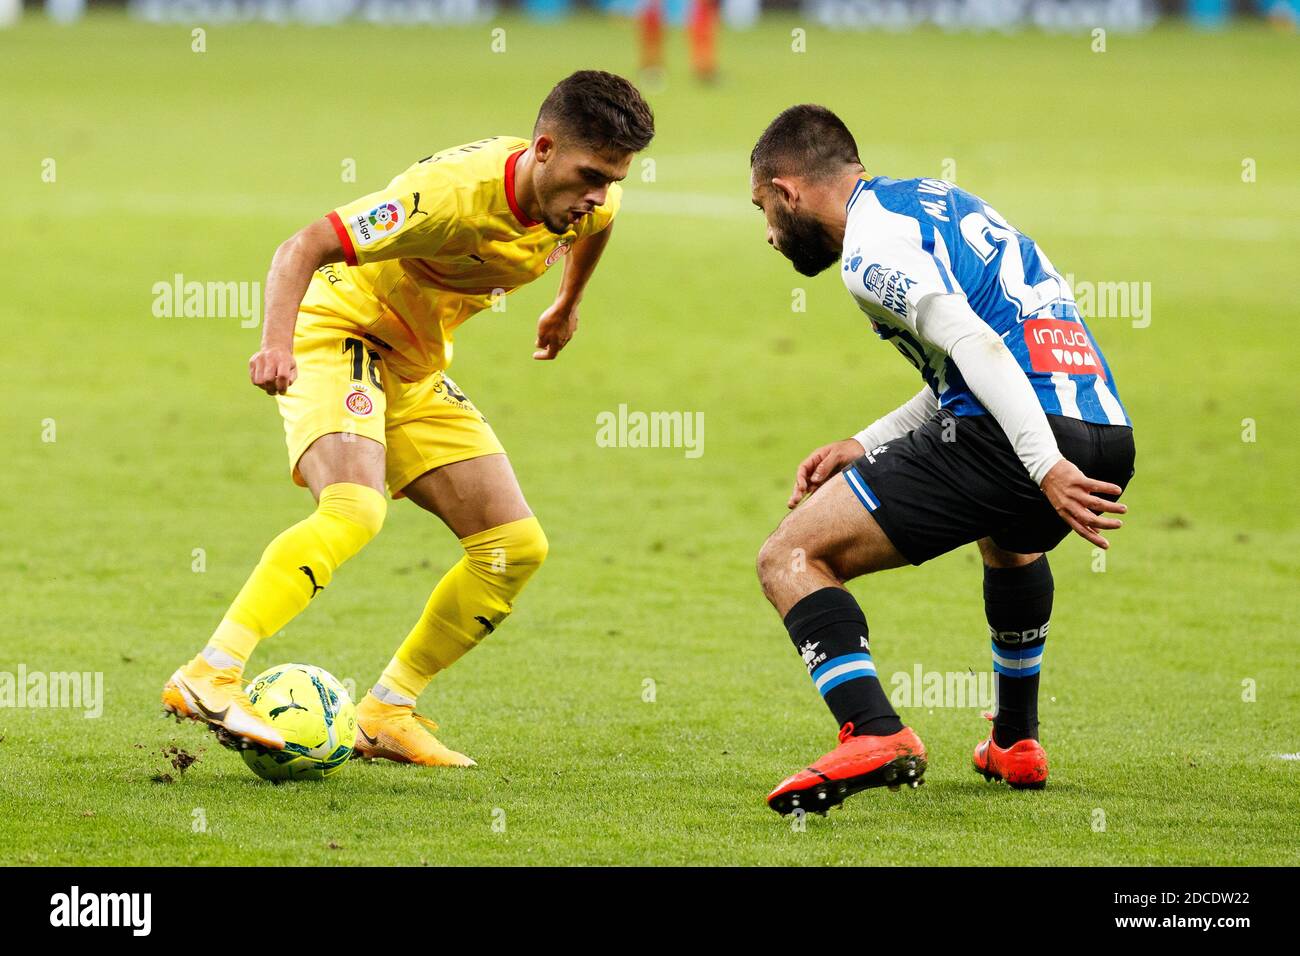 Barcelona, Spain. 20th Nov, 2020. Yan Couto of Girona FC in action with Matias Vargas of RCD Espanyol during the Liga SmartBank match between RCD Espanyol and vs Girona FC at RCD Stadium in Barcelona, Spain. Credit: David Ramirez/DAX/ZUMA Wire/Alamy Live News Stock Photo